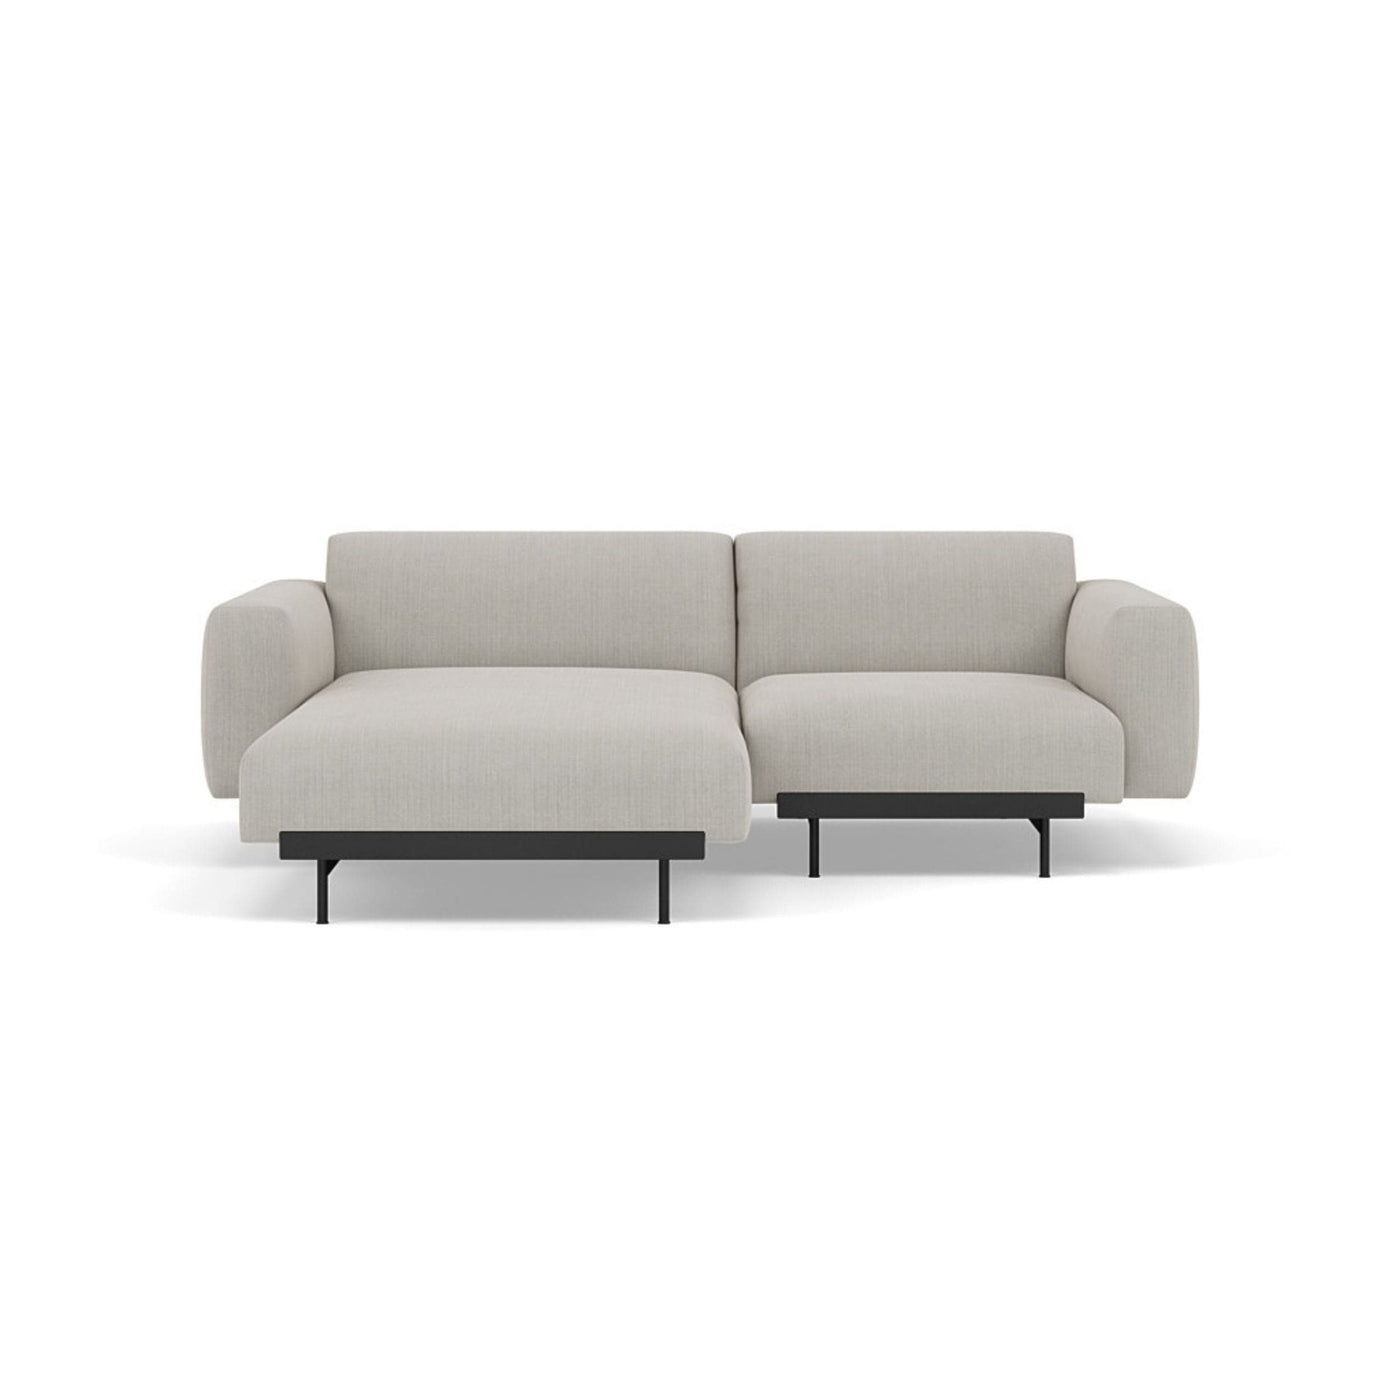 Muuto In Situ Modular 2 Seater Sofa, configuration 5. Made to order from someday designs #colour_fiord-201